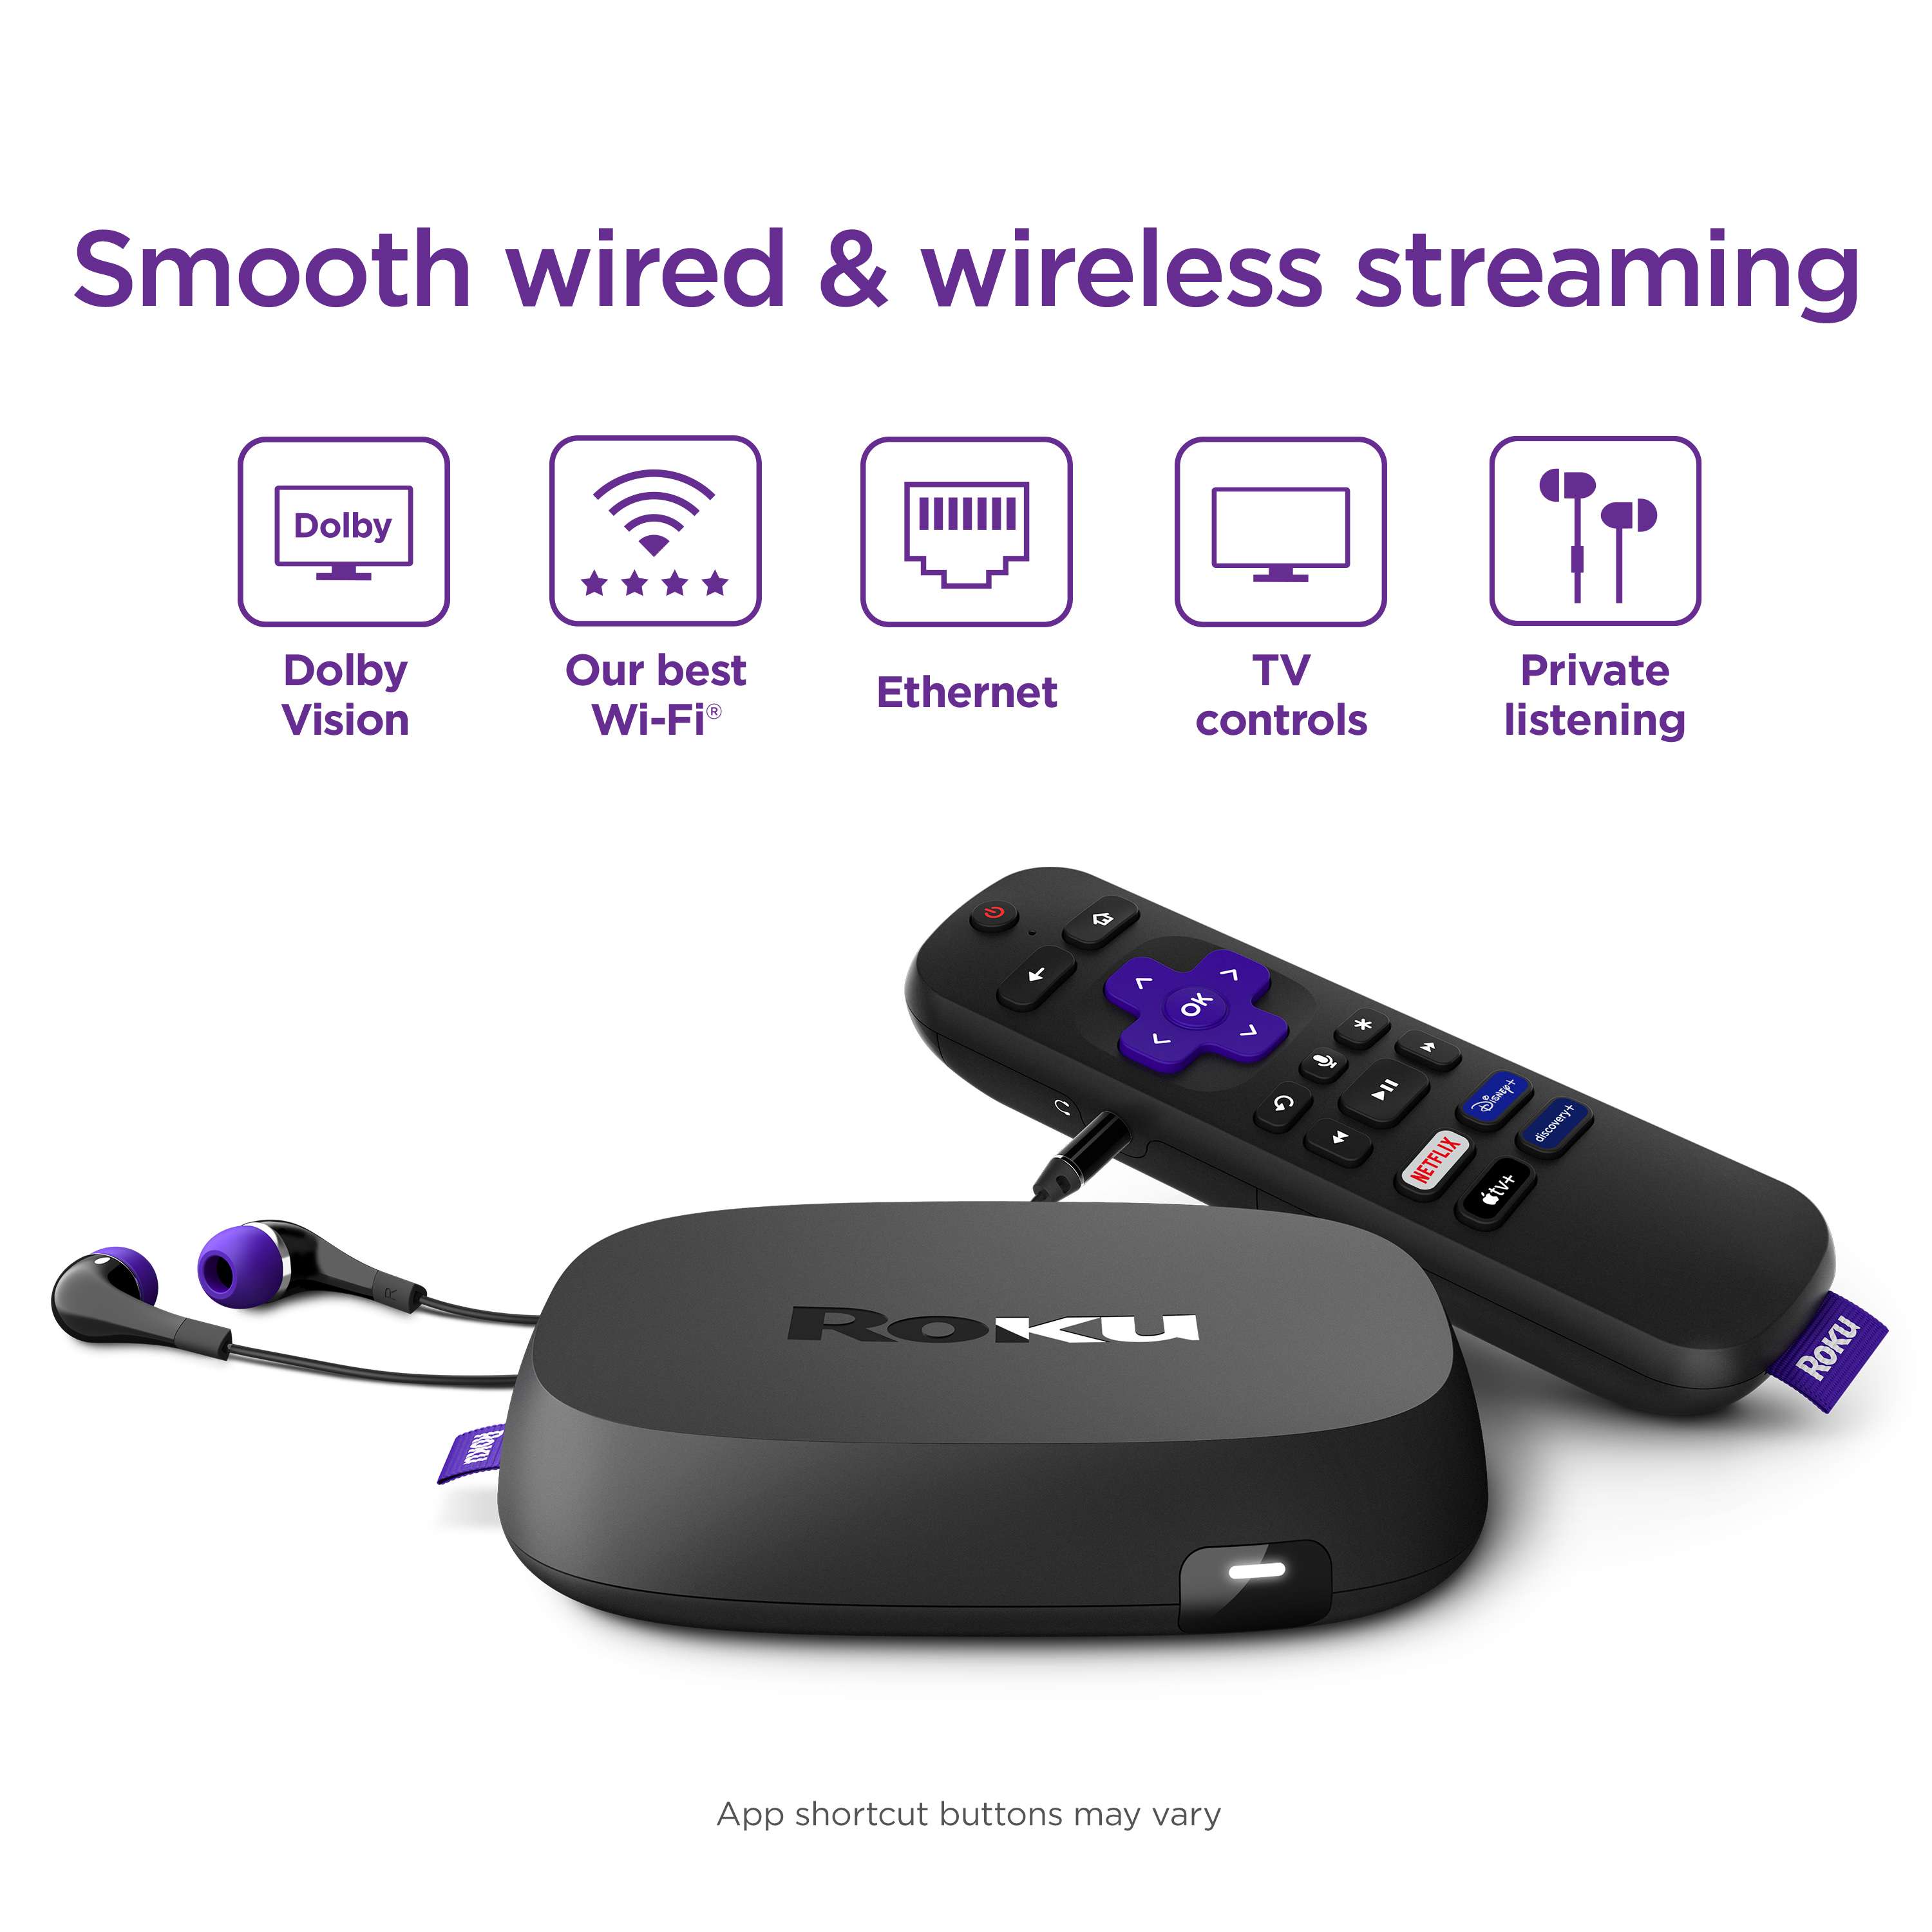 Roku Ultra LT Streaming Device 4K/HDR/Dolby Vision/Dual-Band Wi-Fi® with Roku Voice Remote and HDMI Cable - image 3 of 11